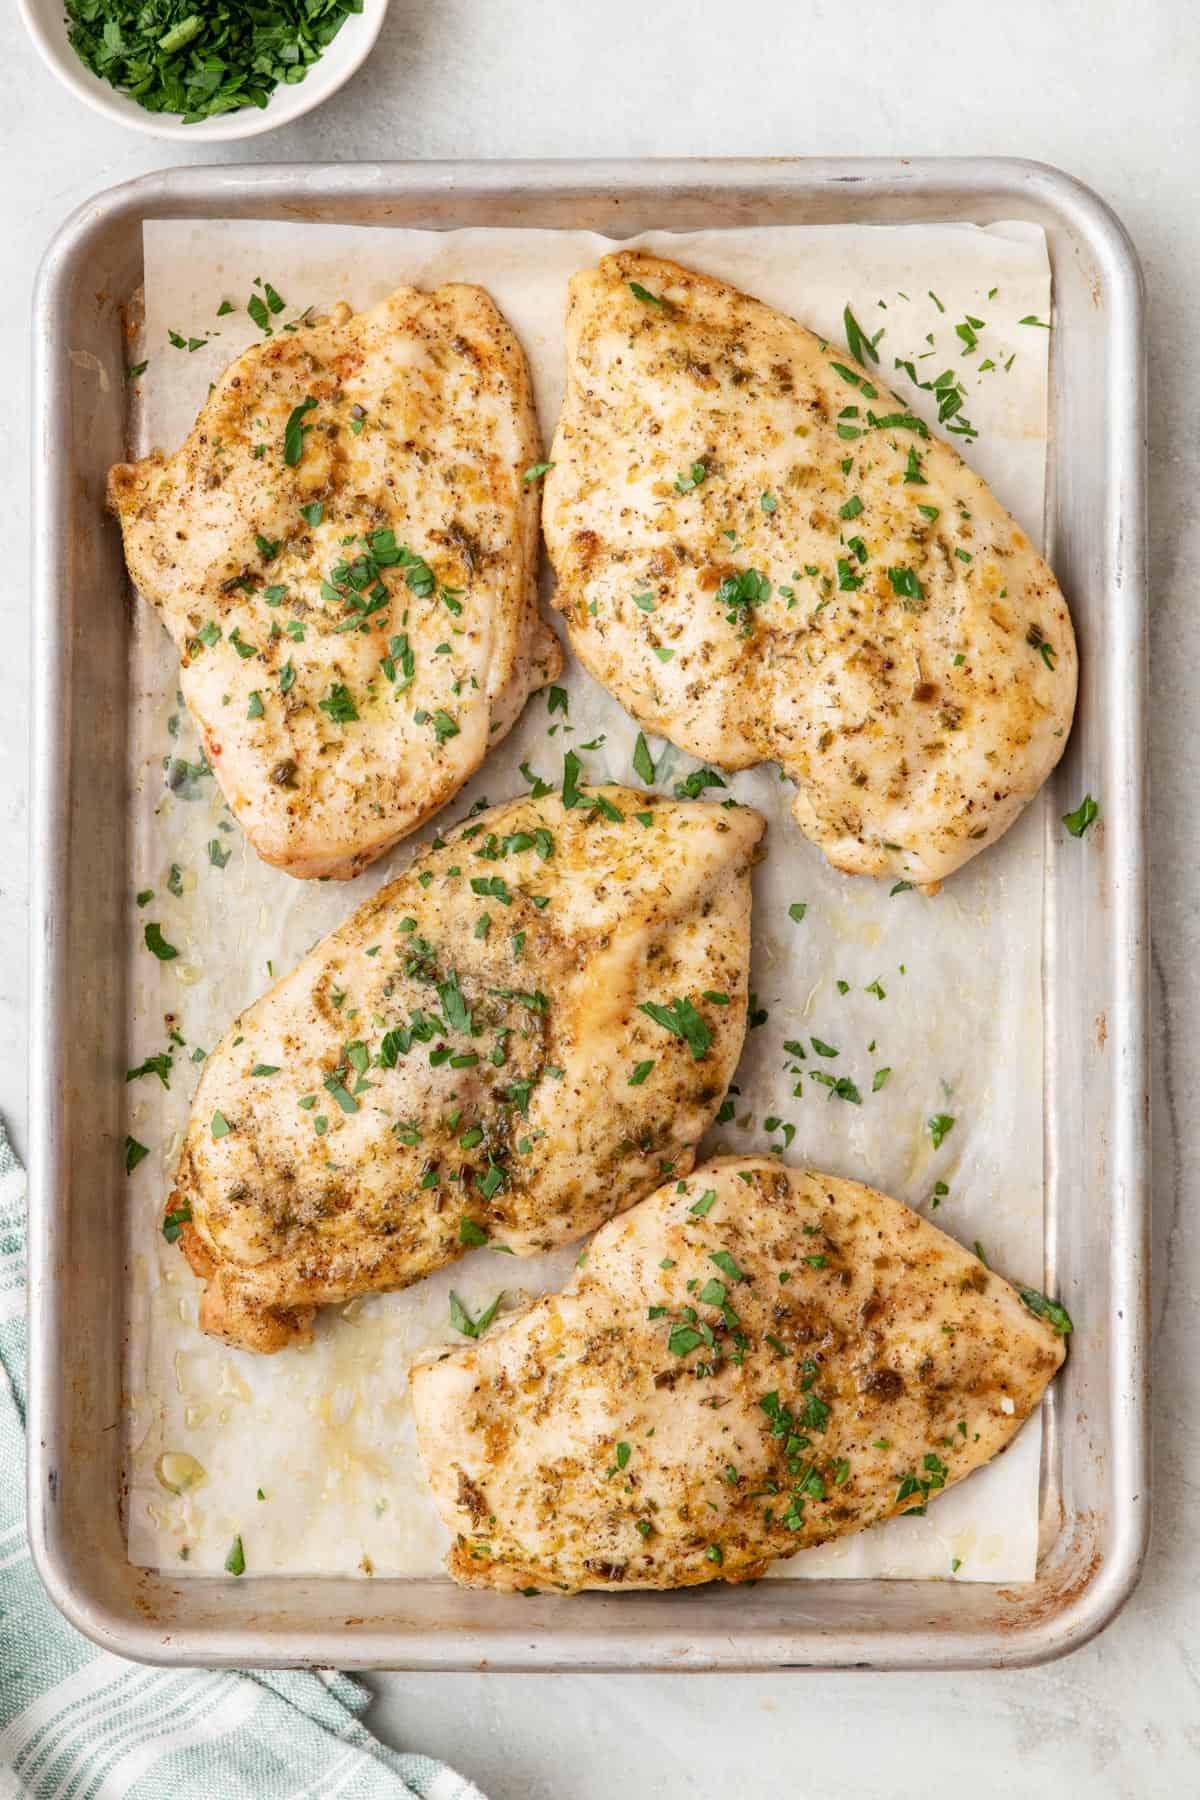 A baking sheet with 4 baked ranch chicken breasts garnished with parsley on parchment paper.